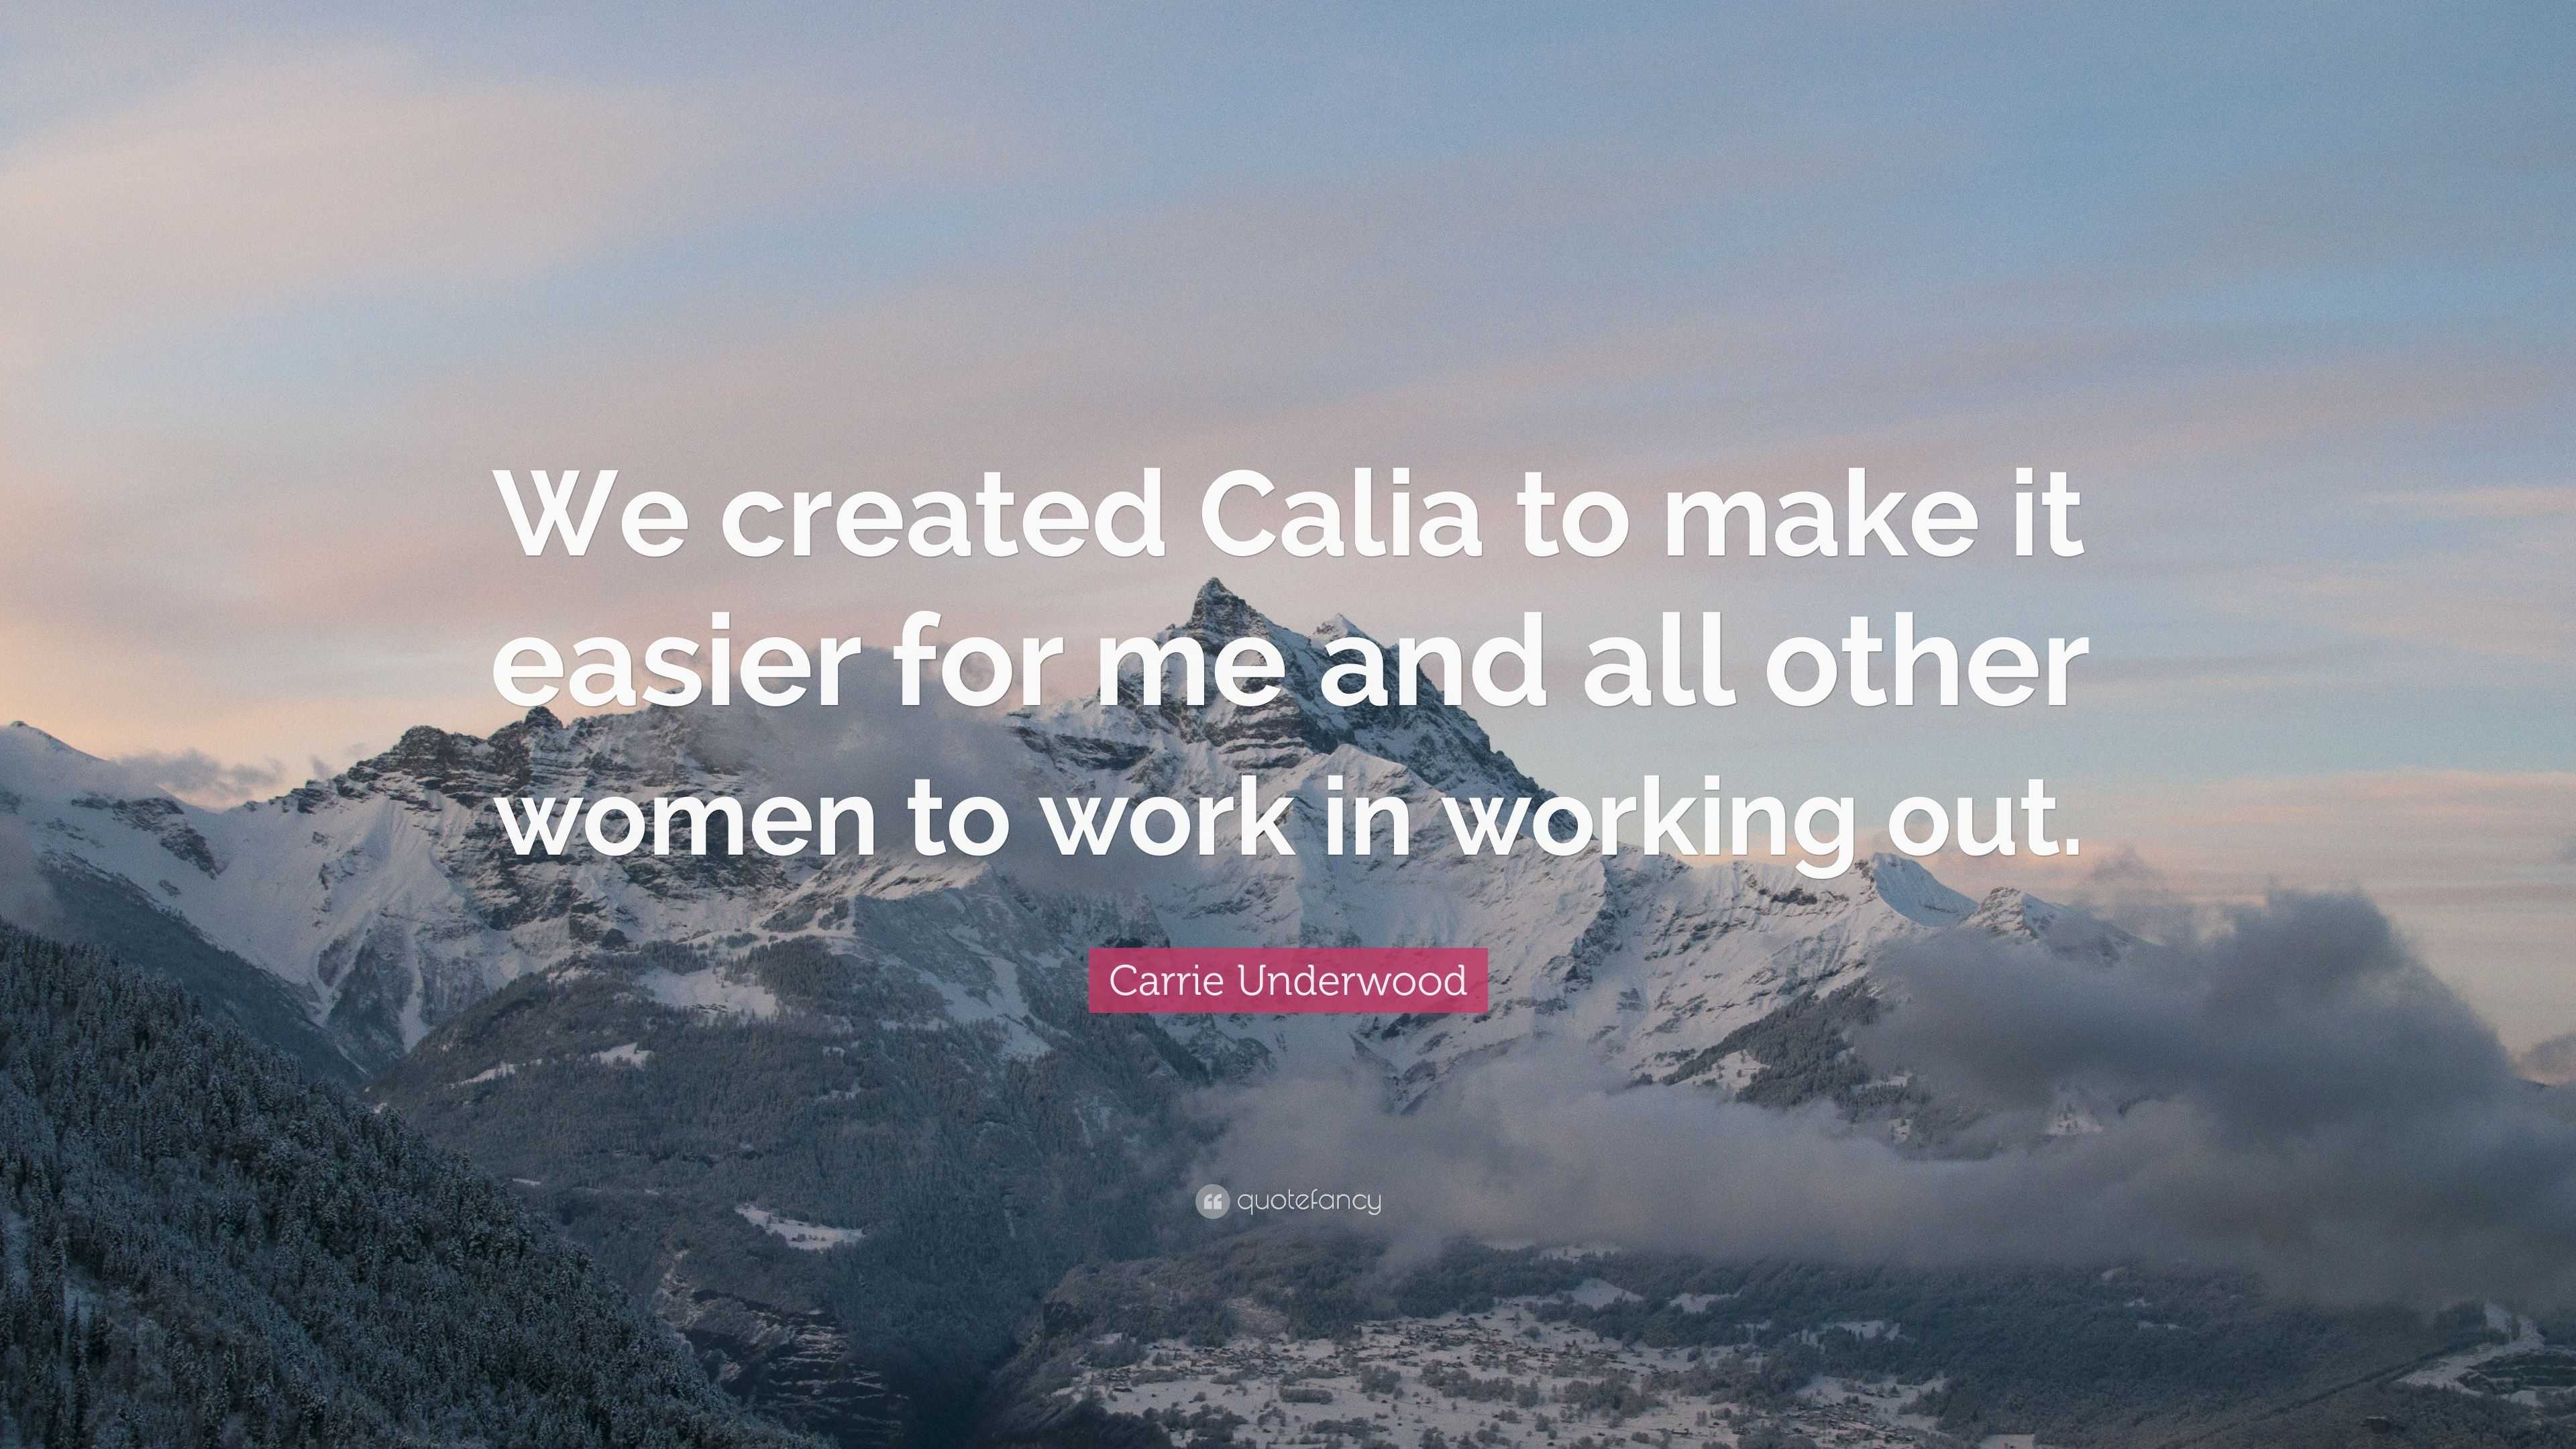 Carrie Underwood Quote: “We created Calia to make it easier for me and all  other women